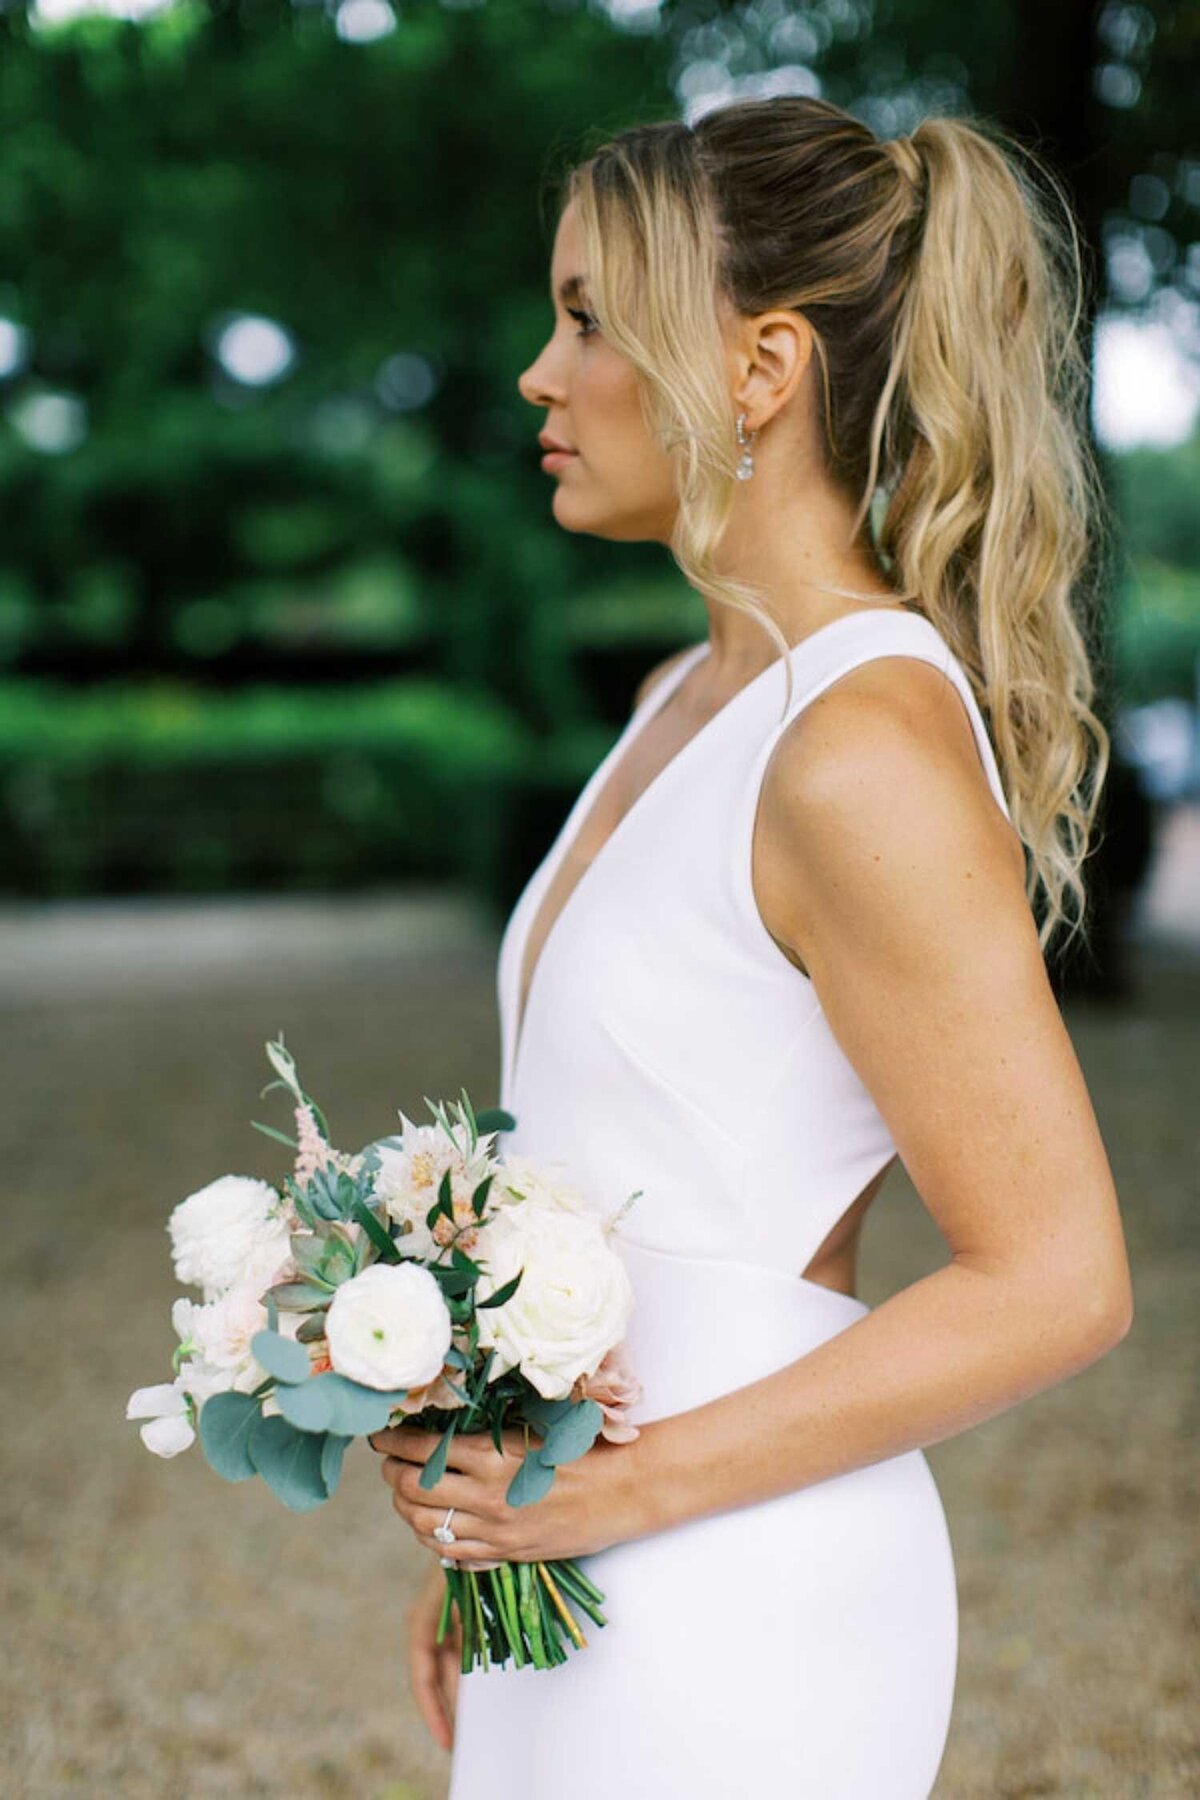 Sleek and modern cutout bridal gown with a ponytail hair style at a  luxury Chicago outdoor garden wedding.